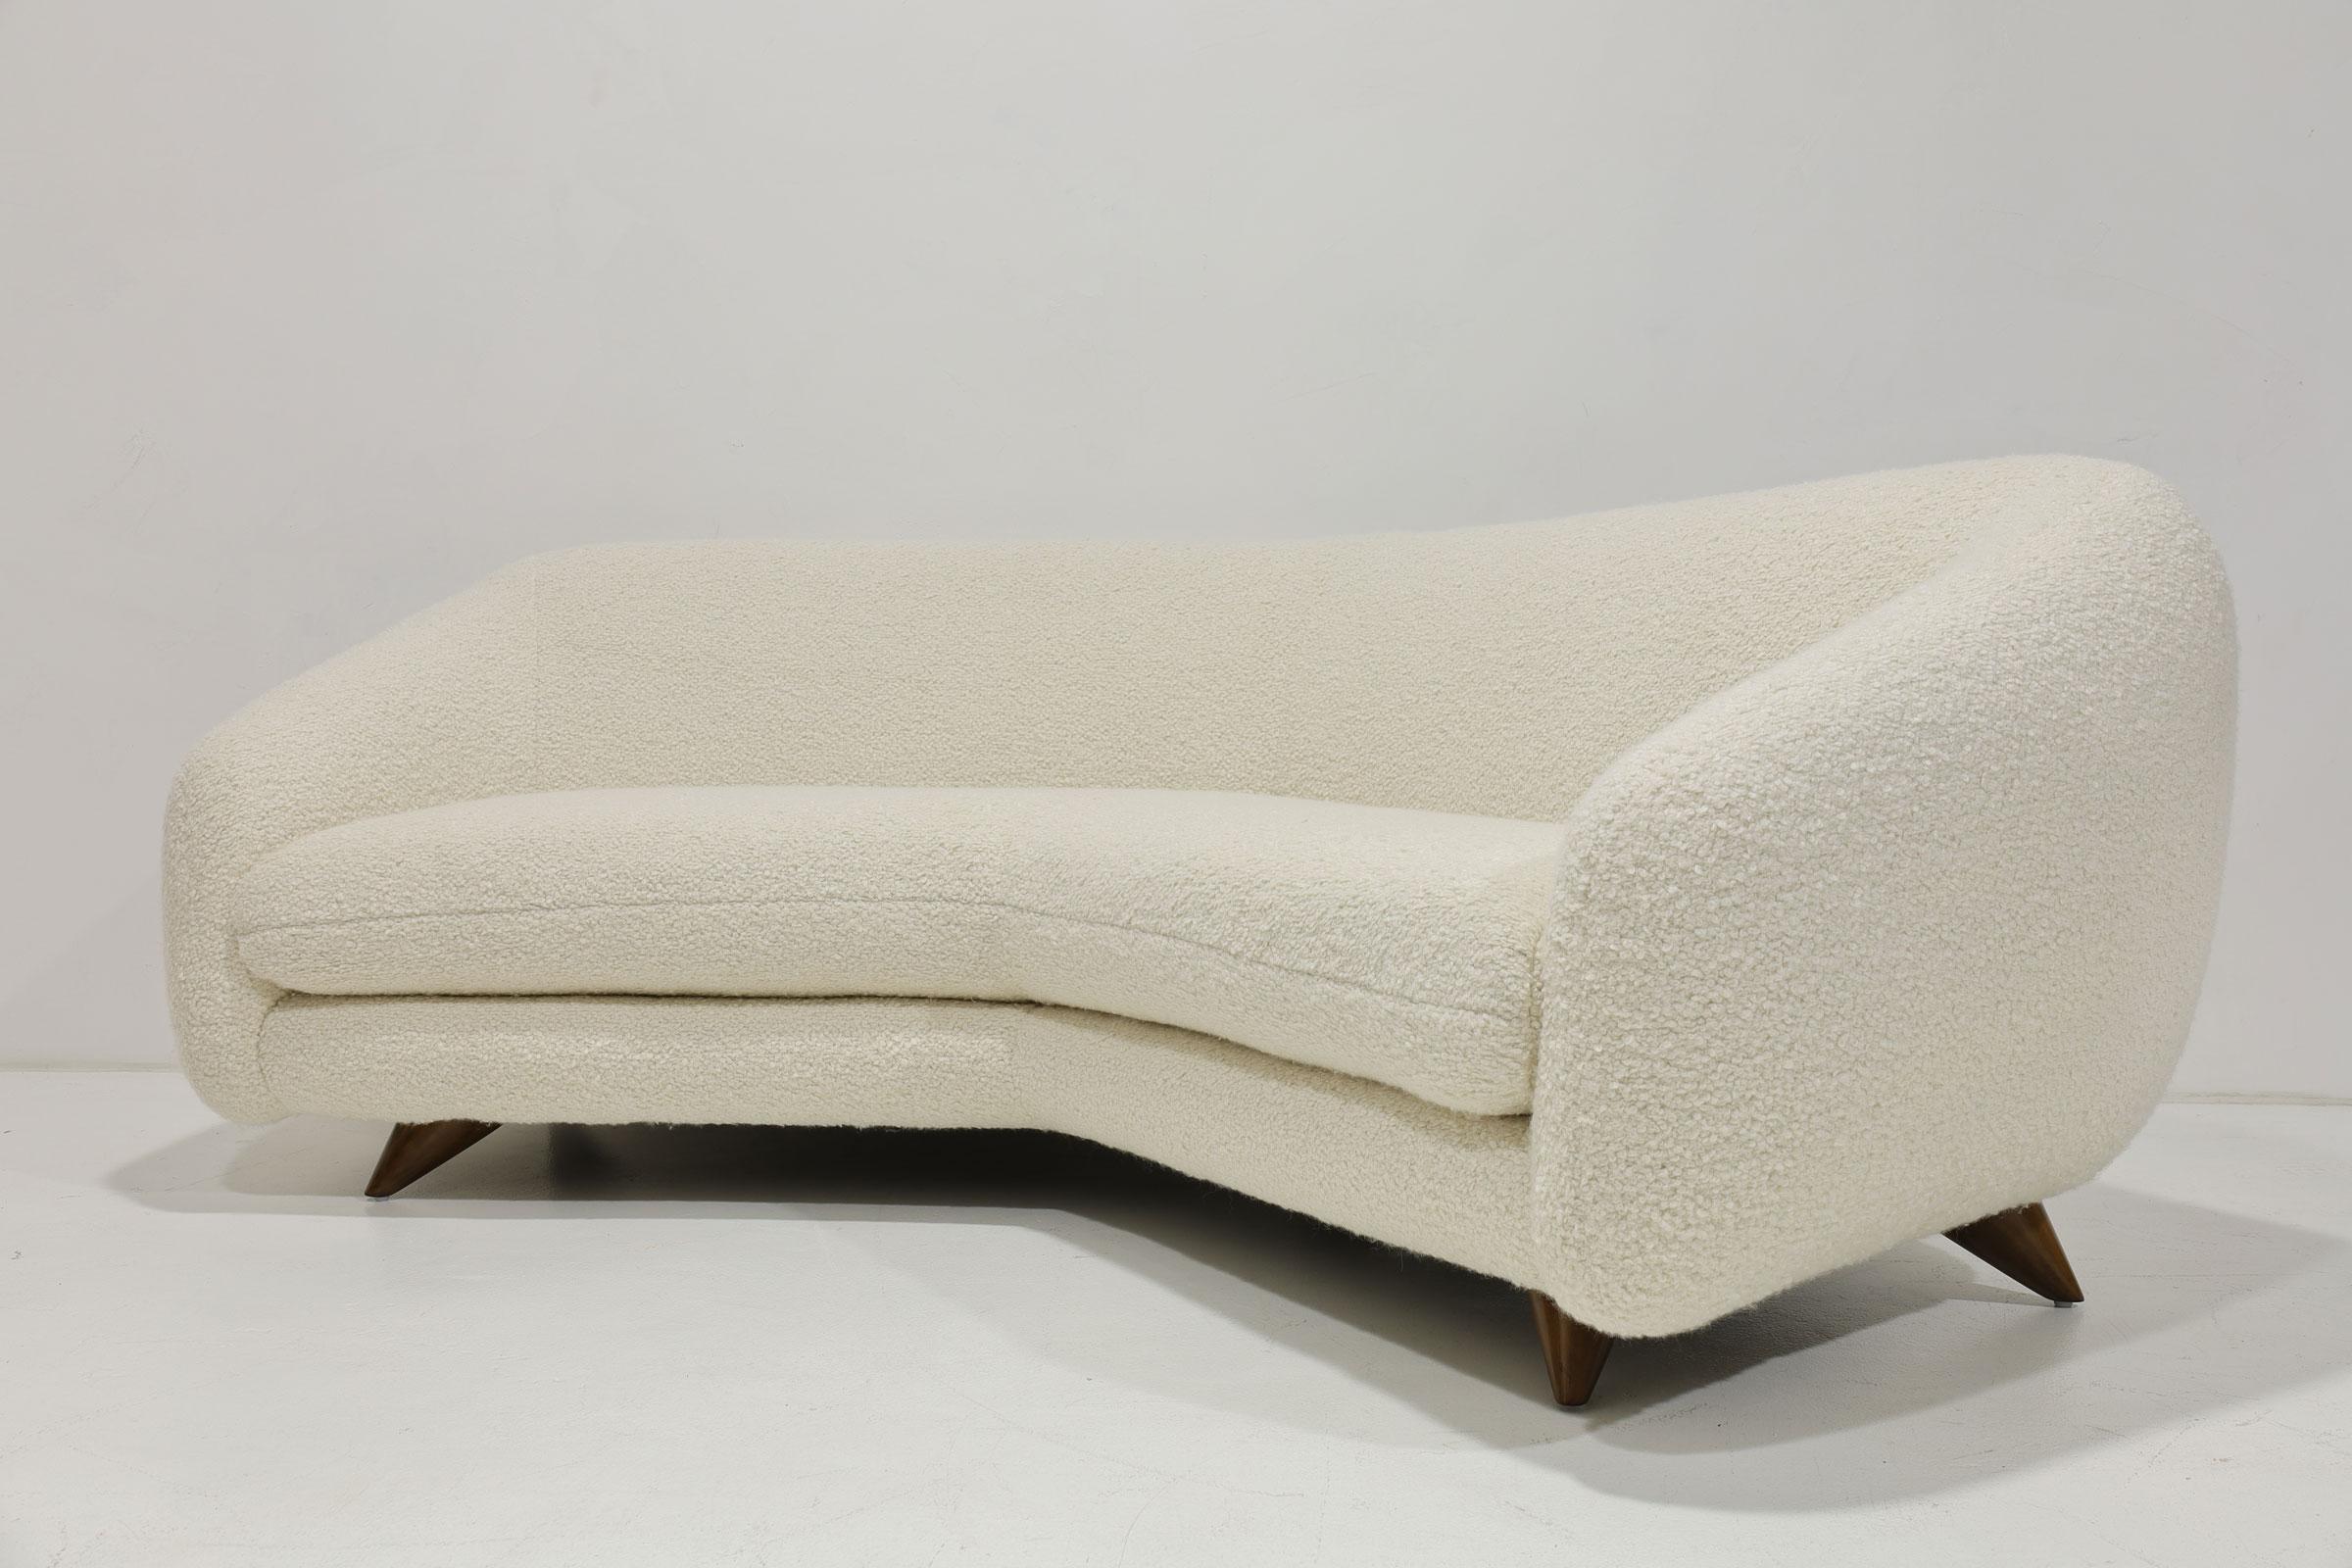 Upholstery Vladimir Kagan Wide Angle Tangent Sofa, Model 506, in Holly Hunt Teddy, 1950s For Sale